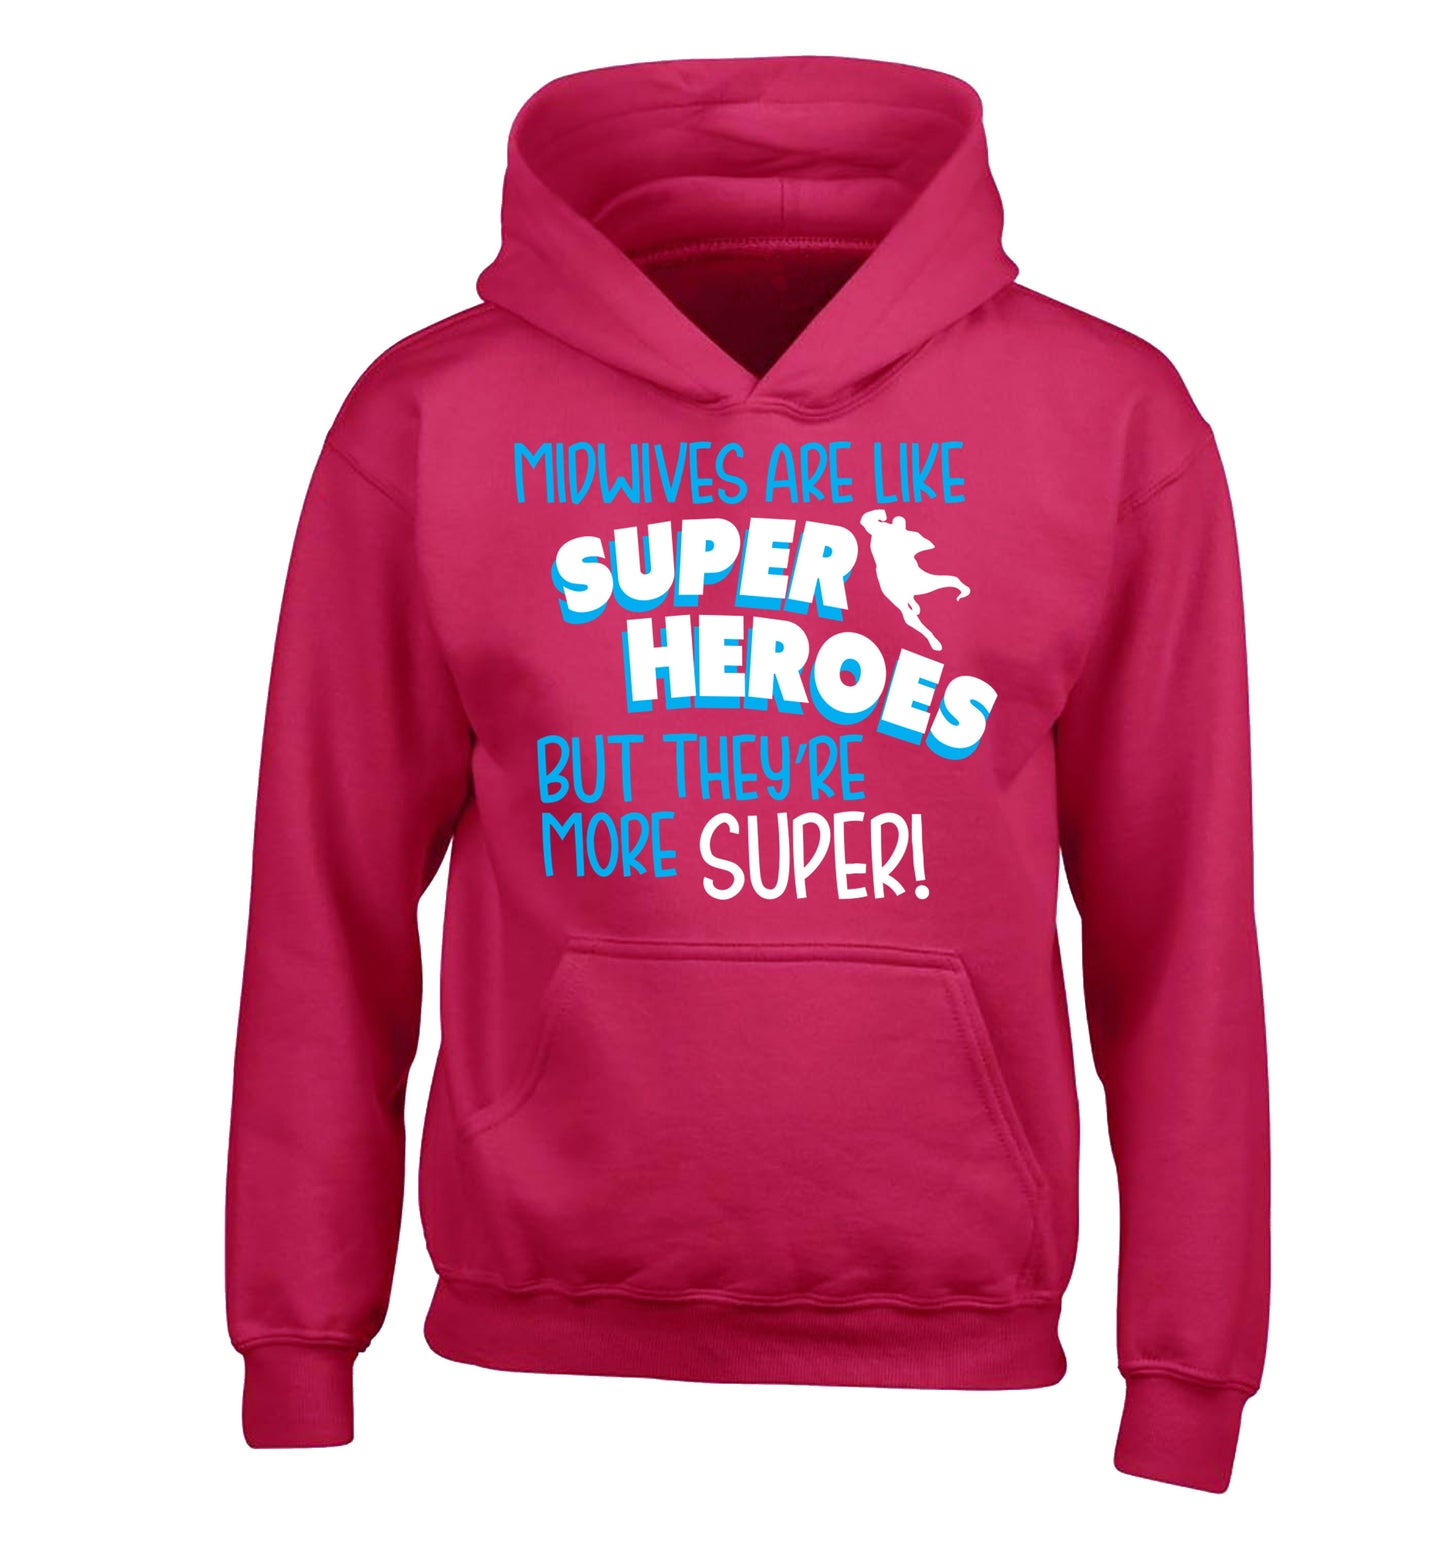 Midwives are like superheros but they're more super children's pink hoodie 12-13 Years